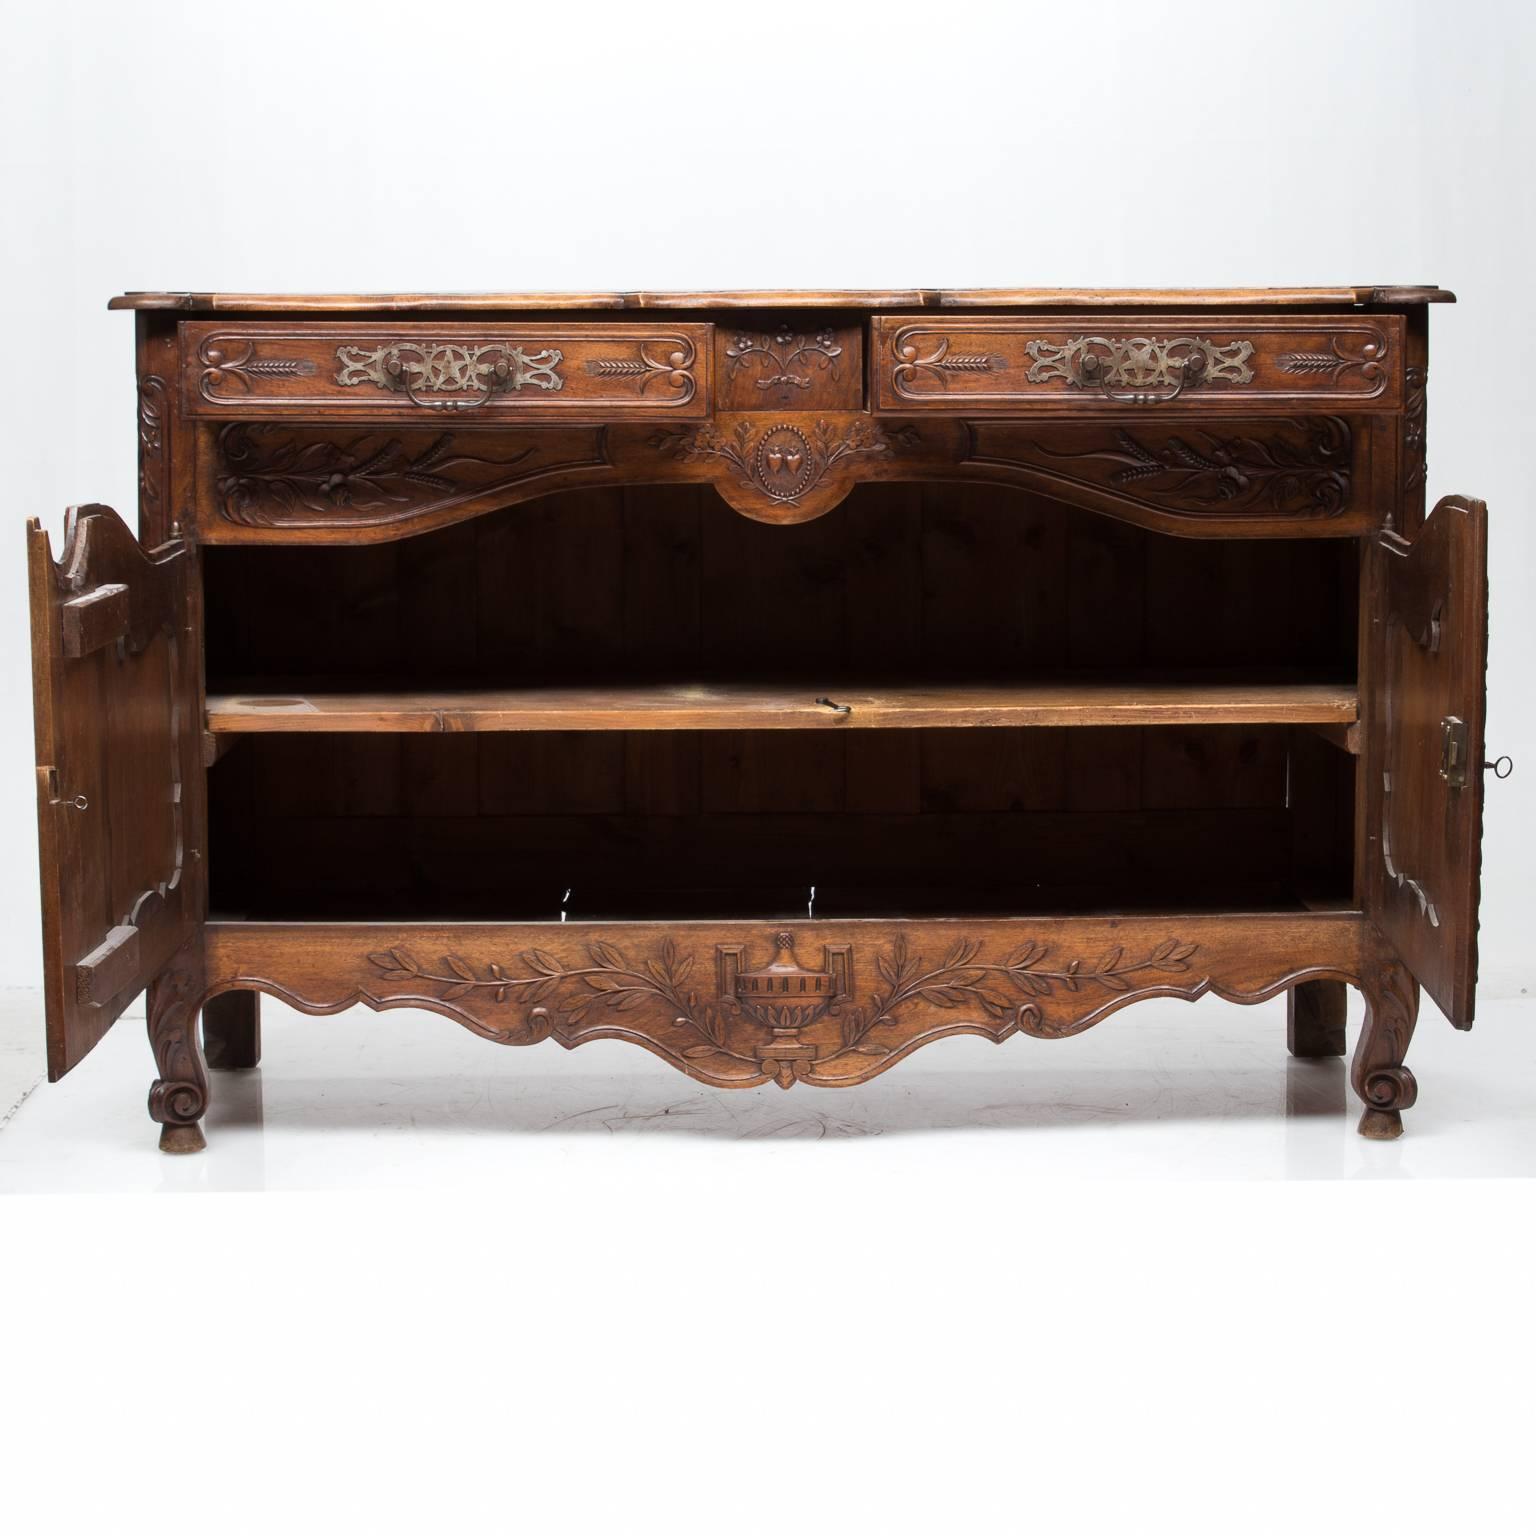 An early 19th century walnut French Provincial two-door carved buffet. Very impressive decorative hardware and stout bar hinges. There are two drawers above two doors which open to reveal a single shelf. The top is shaped; the front is cut with